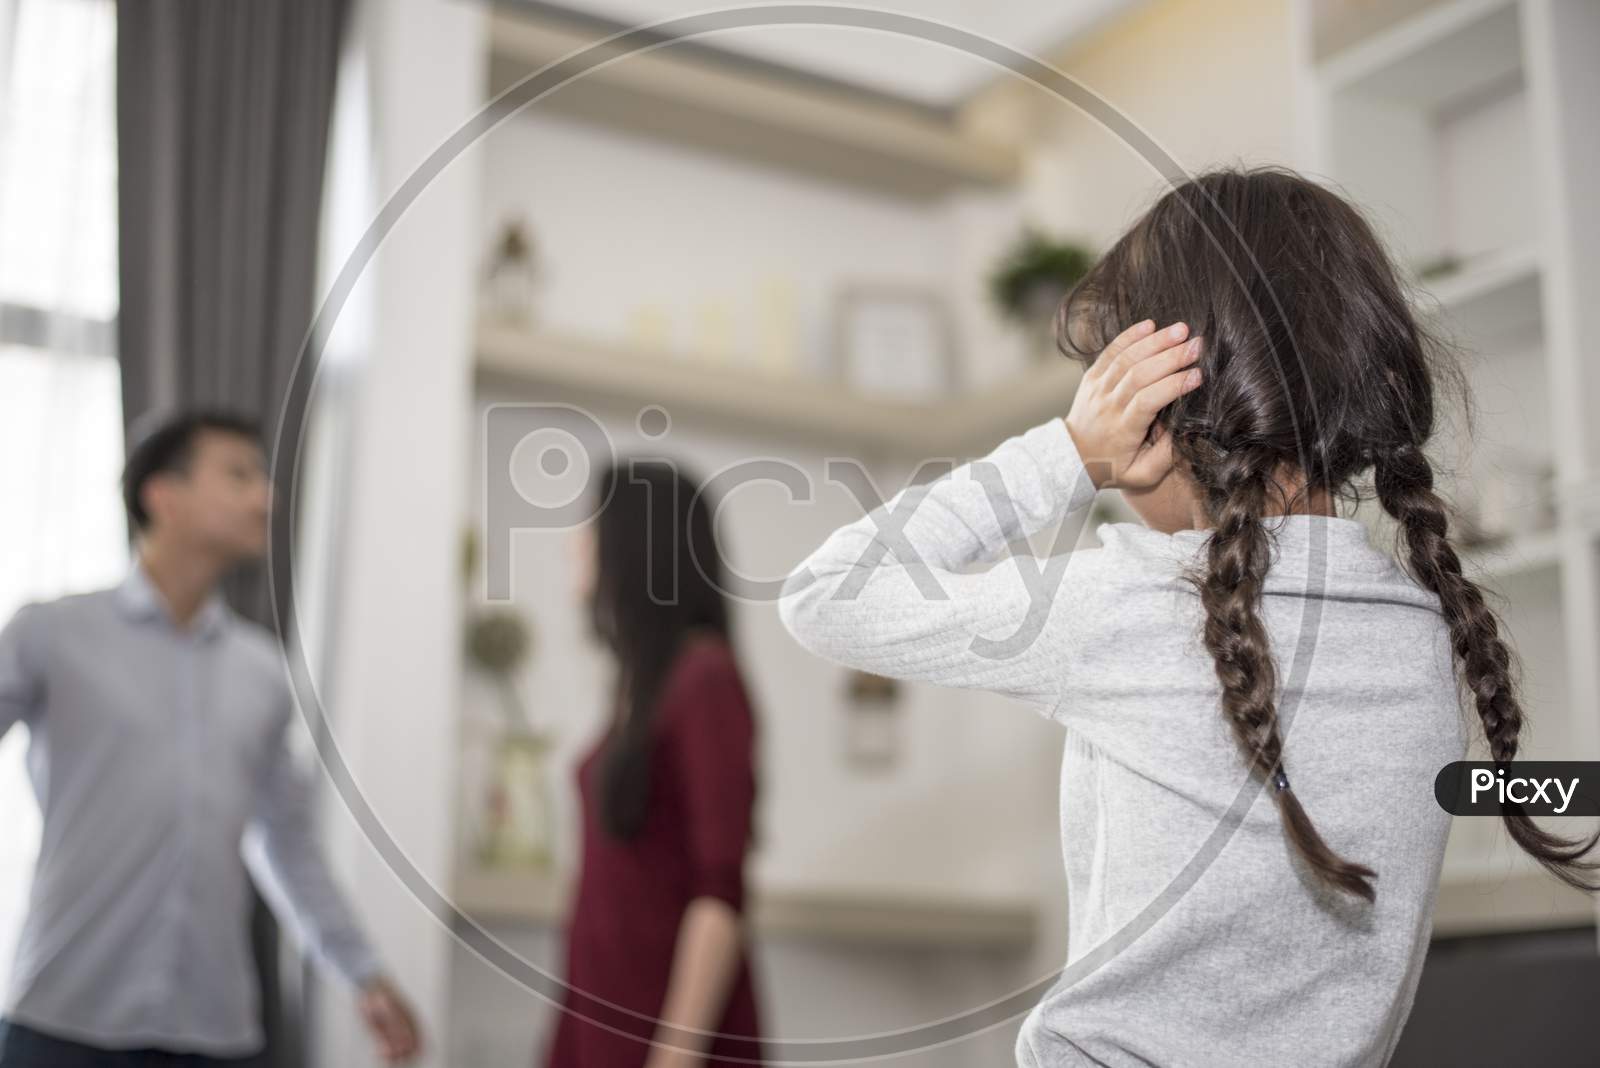 In Back View, Little Girl Puts Her Hands On Her Ears Because She Does Not Want To Hear Her Dad And Mom Quarrel. Close Ears, Family Dramatic Scene, Parrents Issues, Social And Parents Problem Concept